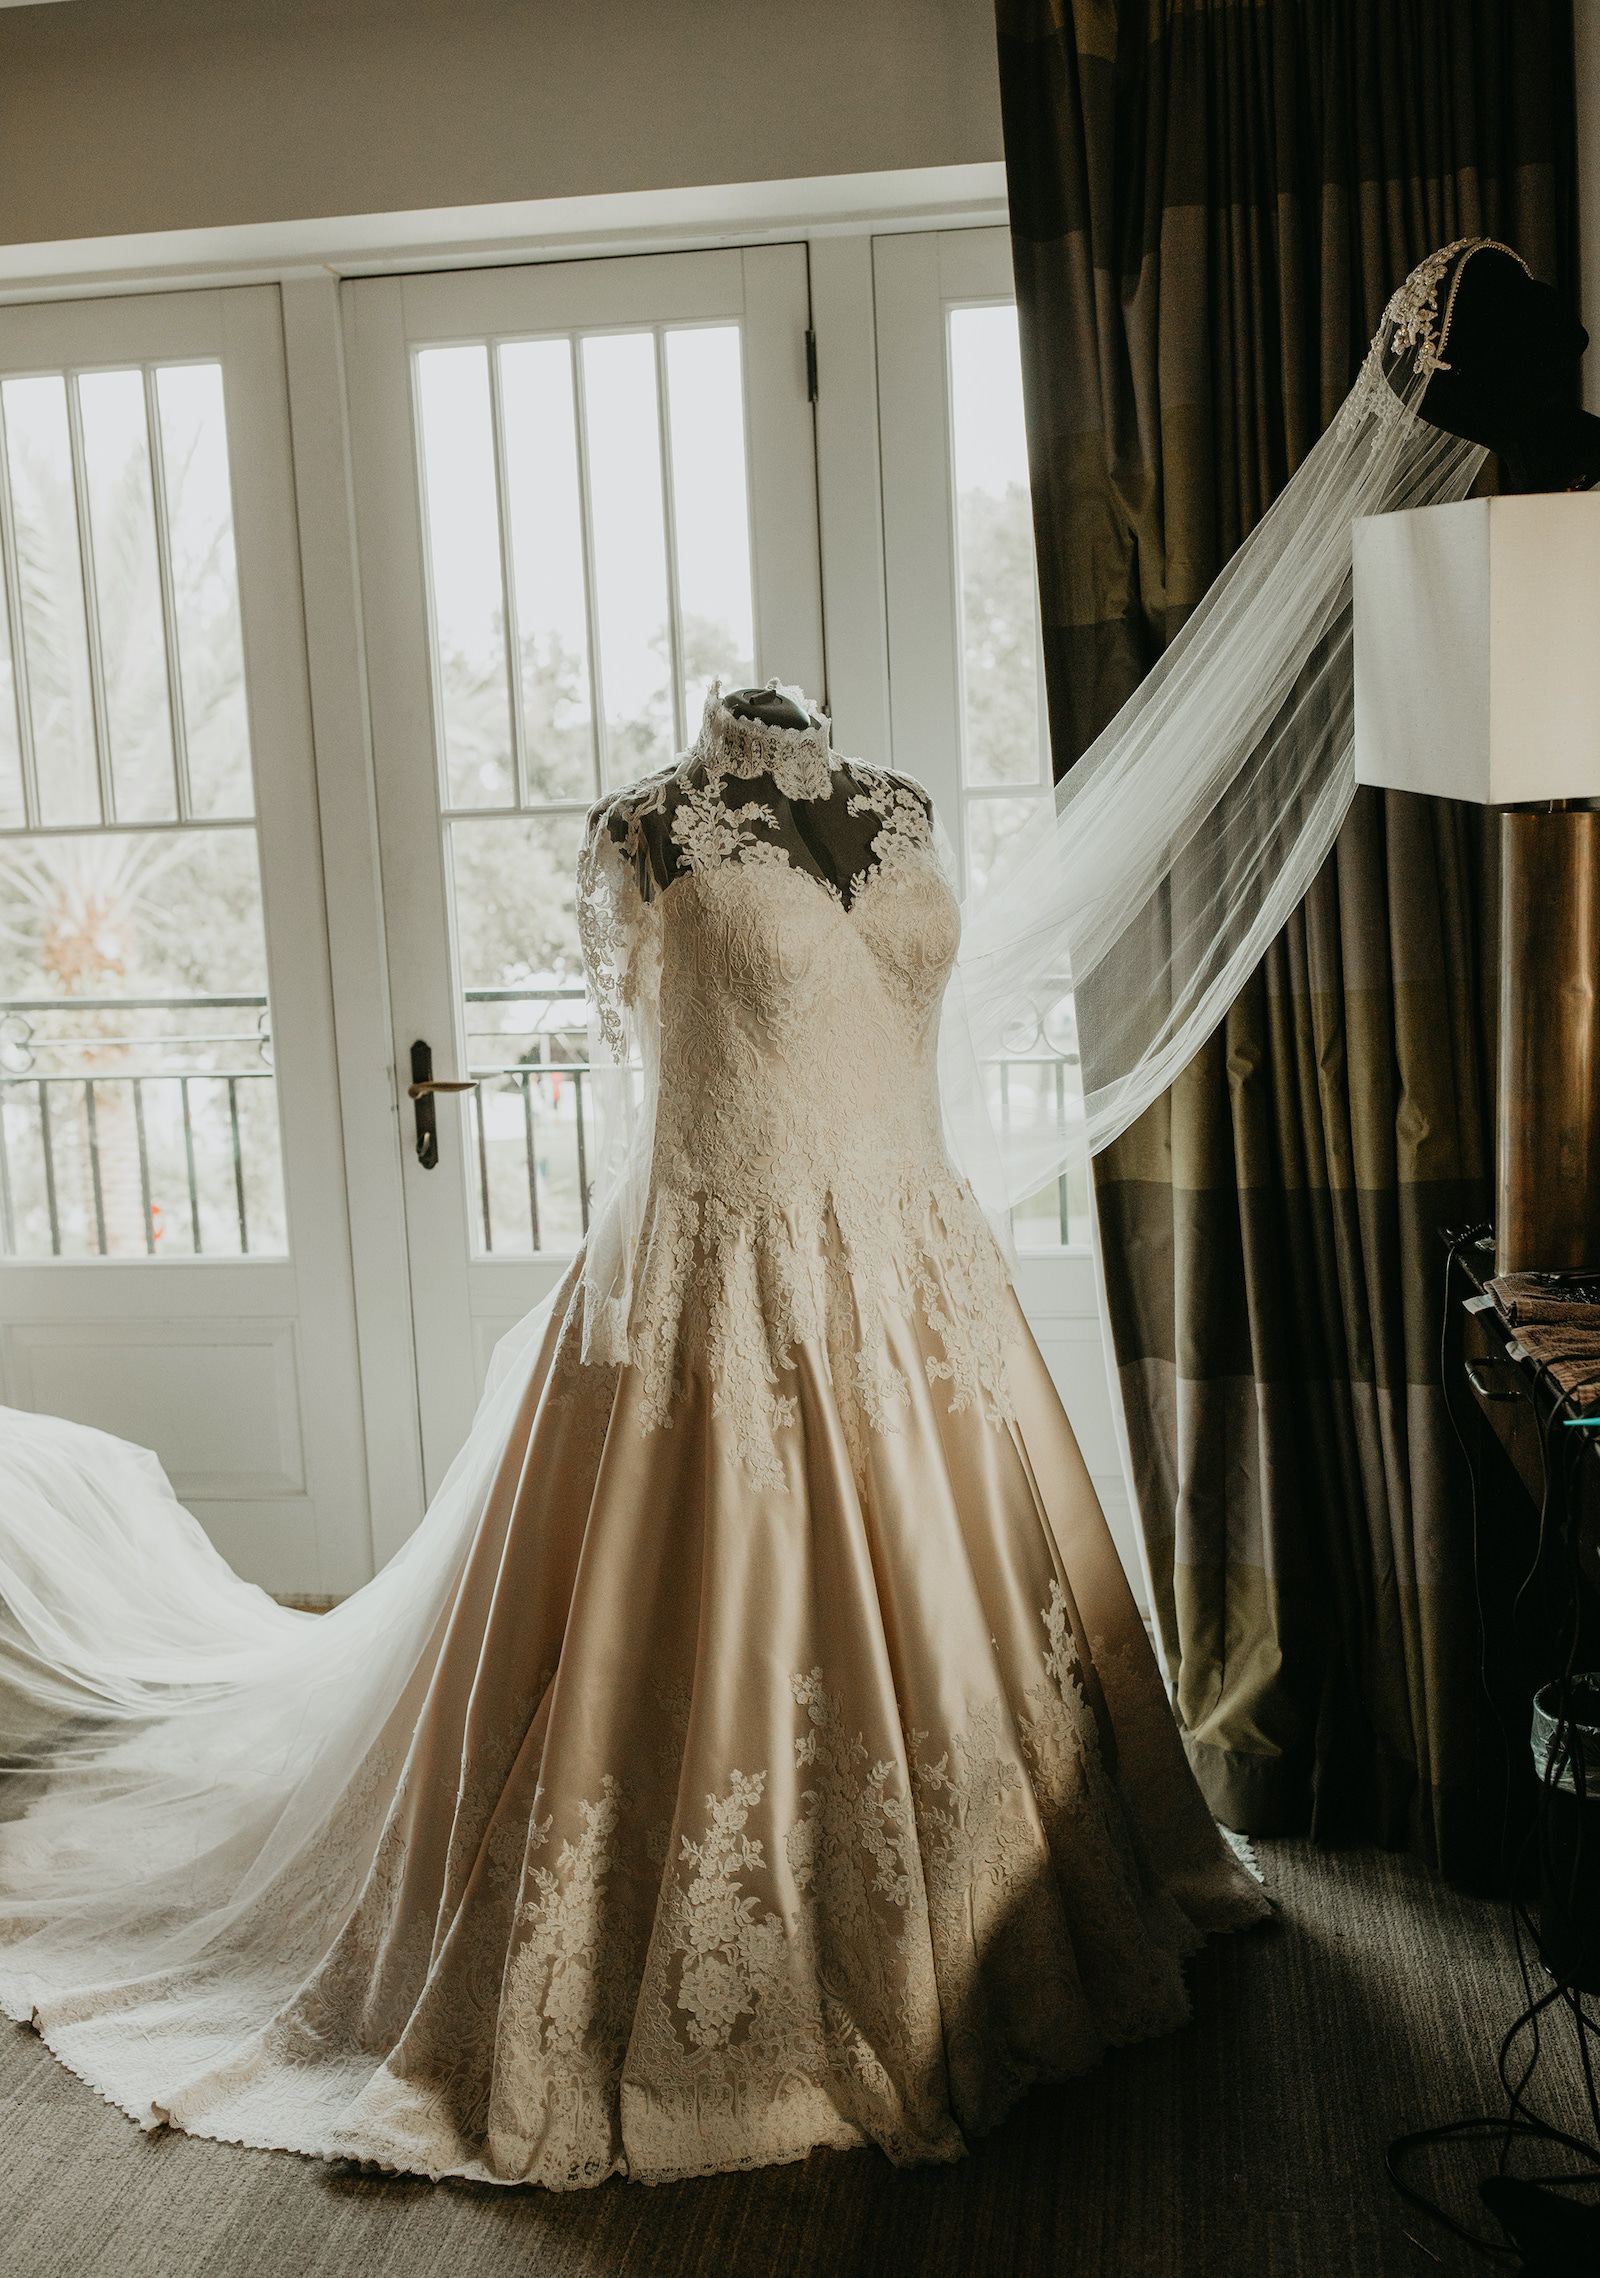 Champagne and Ivory Lace Allure Bridal Ball Gown with Sweetheart Neckline and Illusion Lace Bodice and Sleeves | A Line Wedding Dress with Cathedral Veil